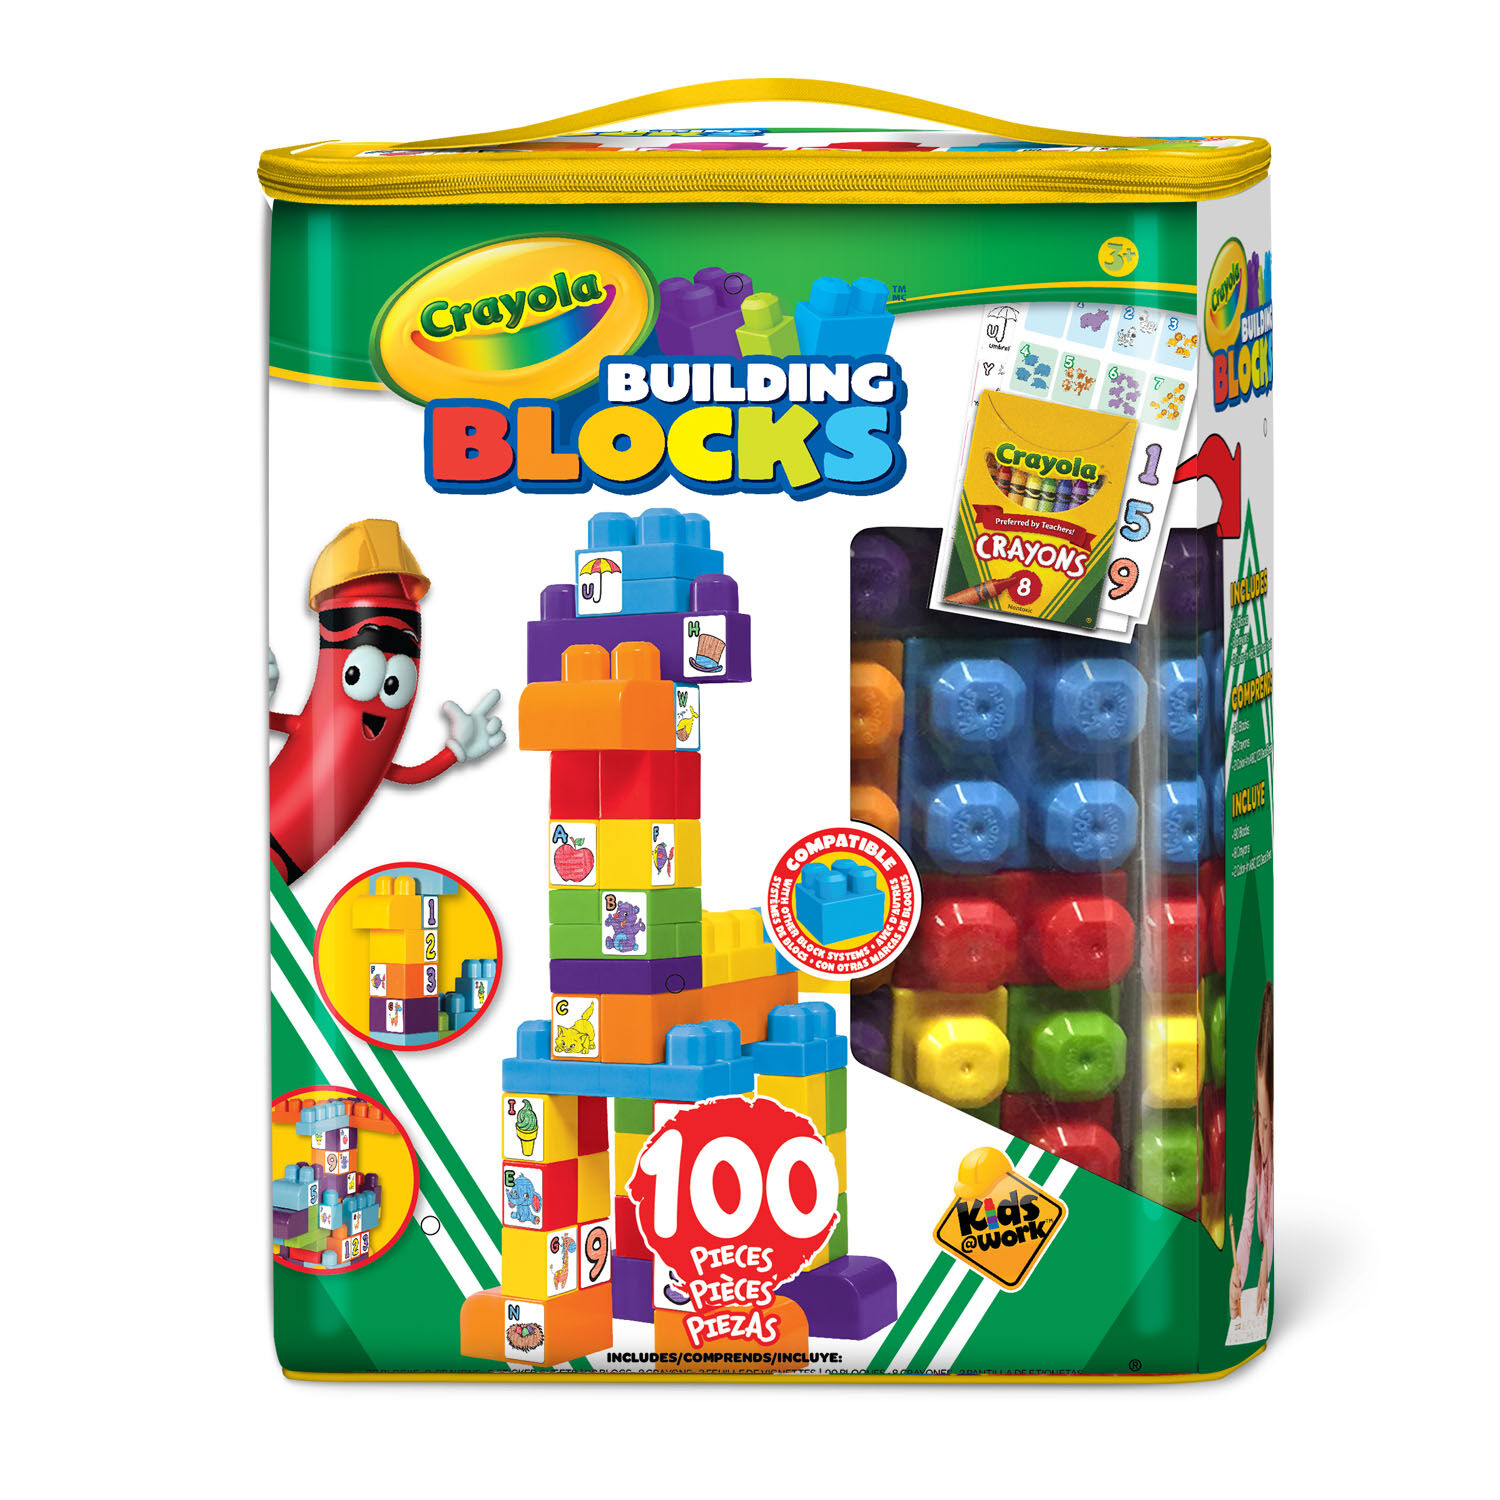 tytan magnetic learning tiles building set with 100 pieces